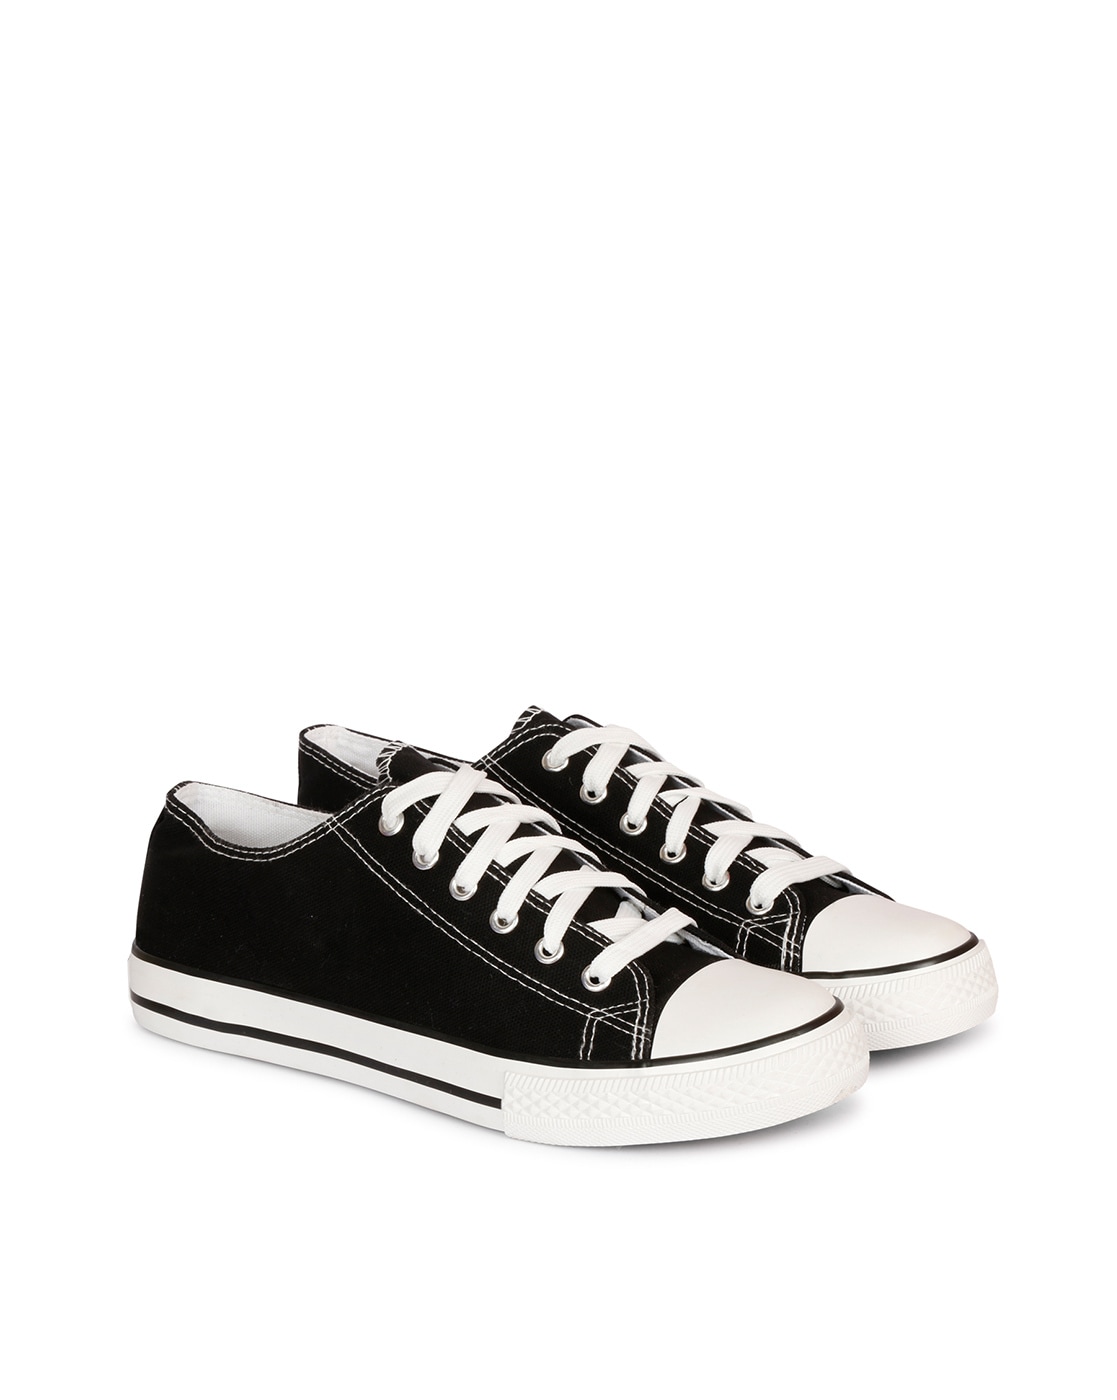 Buy Black Casual Shoes for Men by MOZAFIA Online